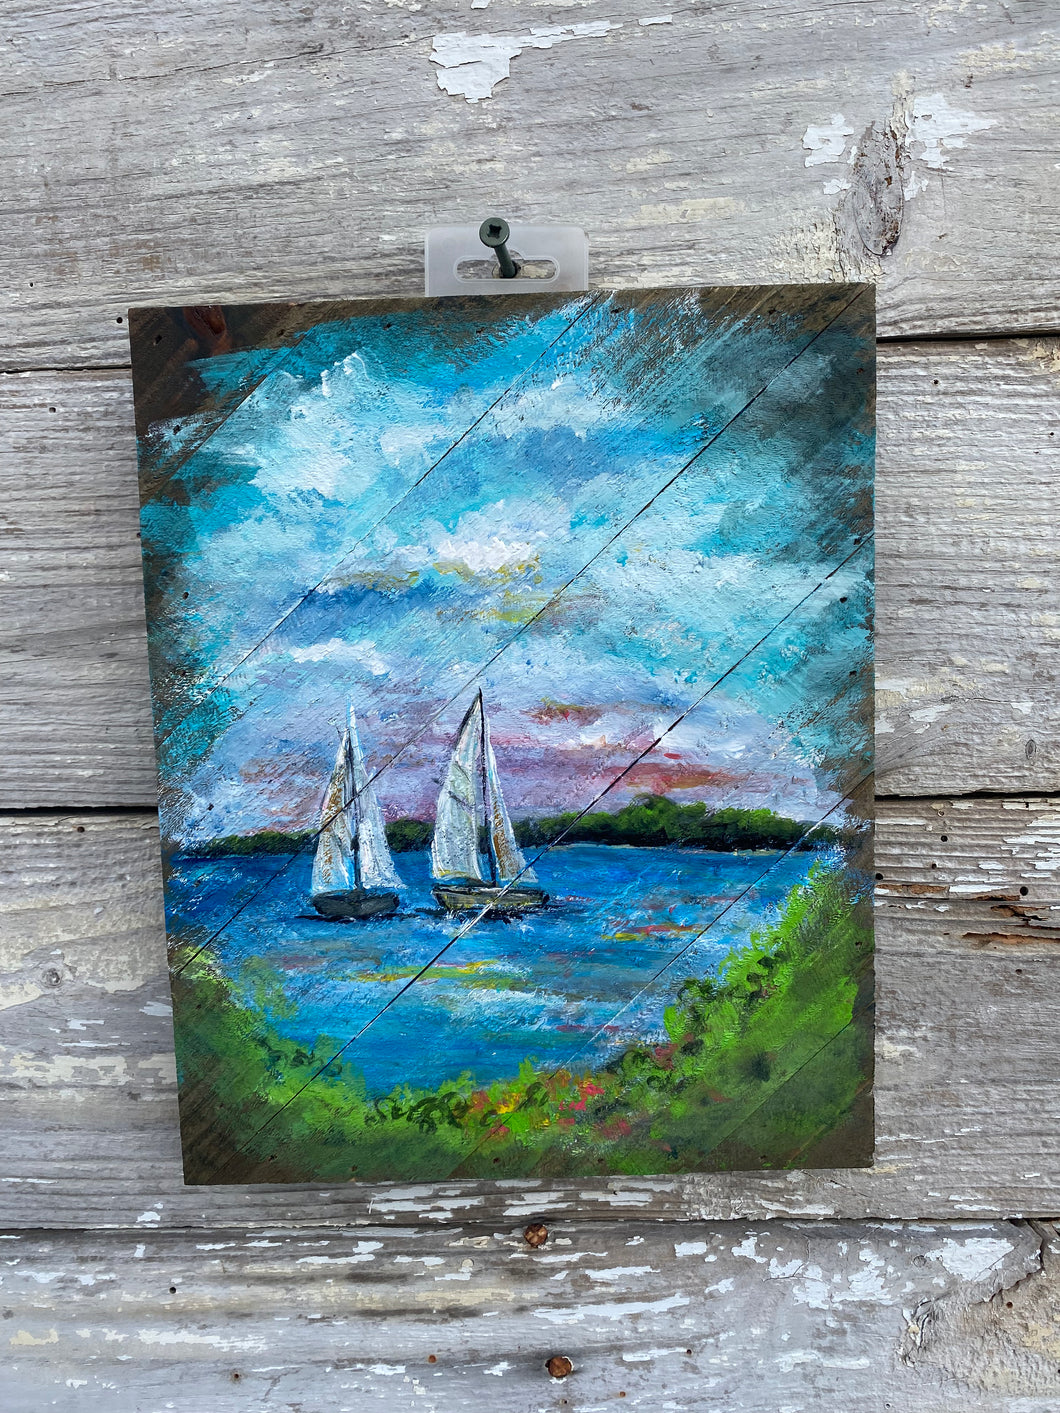 Sailing at Sunrise - Hand-painted Wooden Pallet Wood Wall Decor